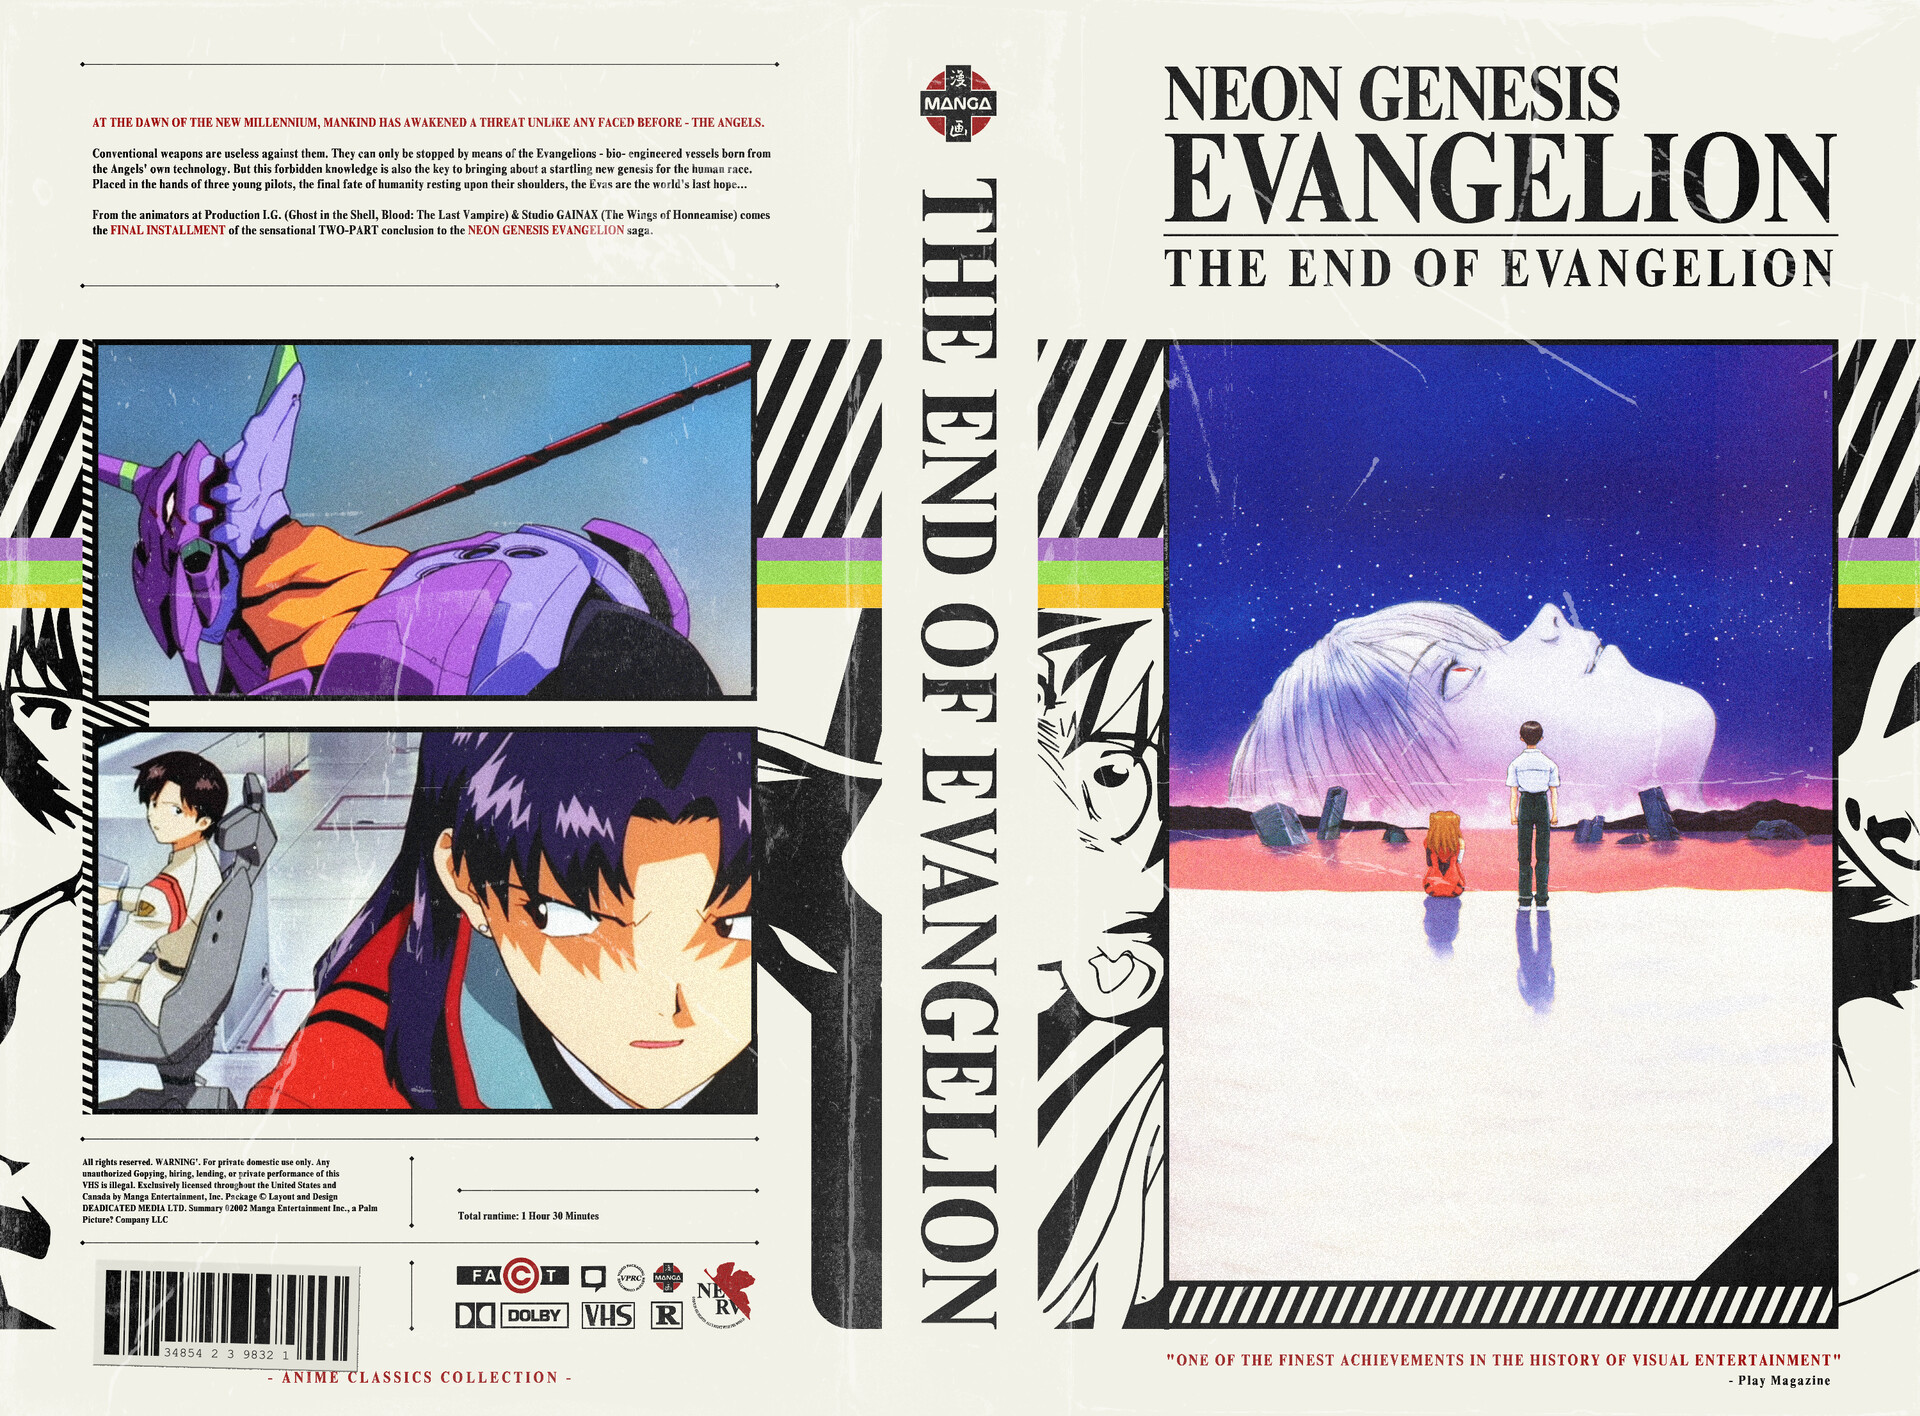 Awwh yeah that's a VHS cover for The End of Evangelion // Evangelio...